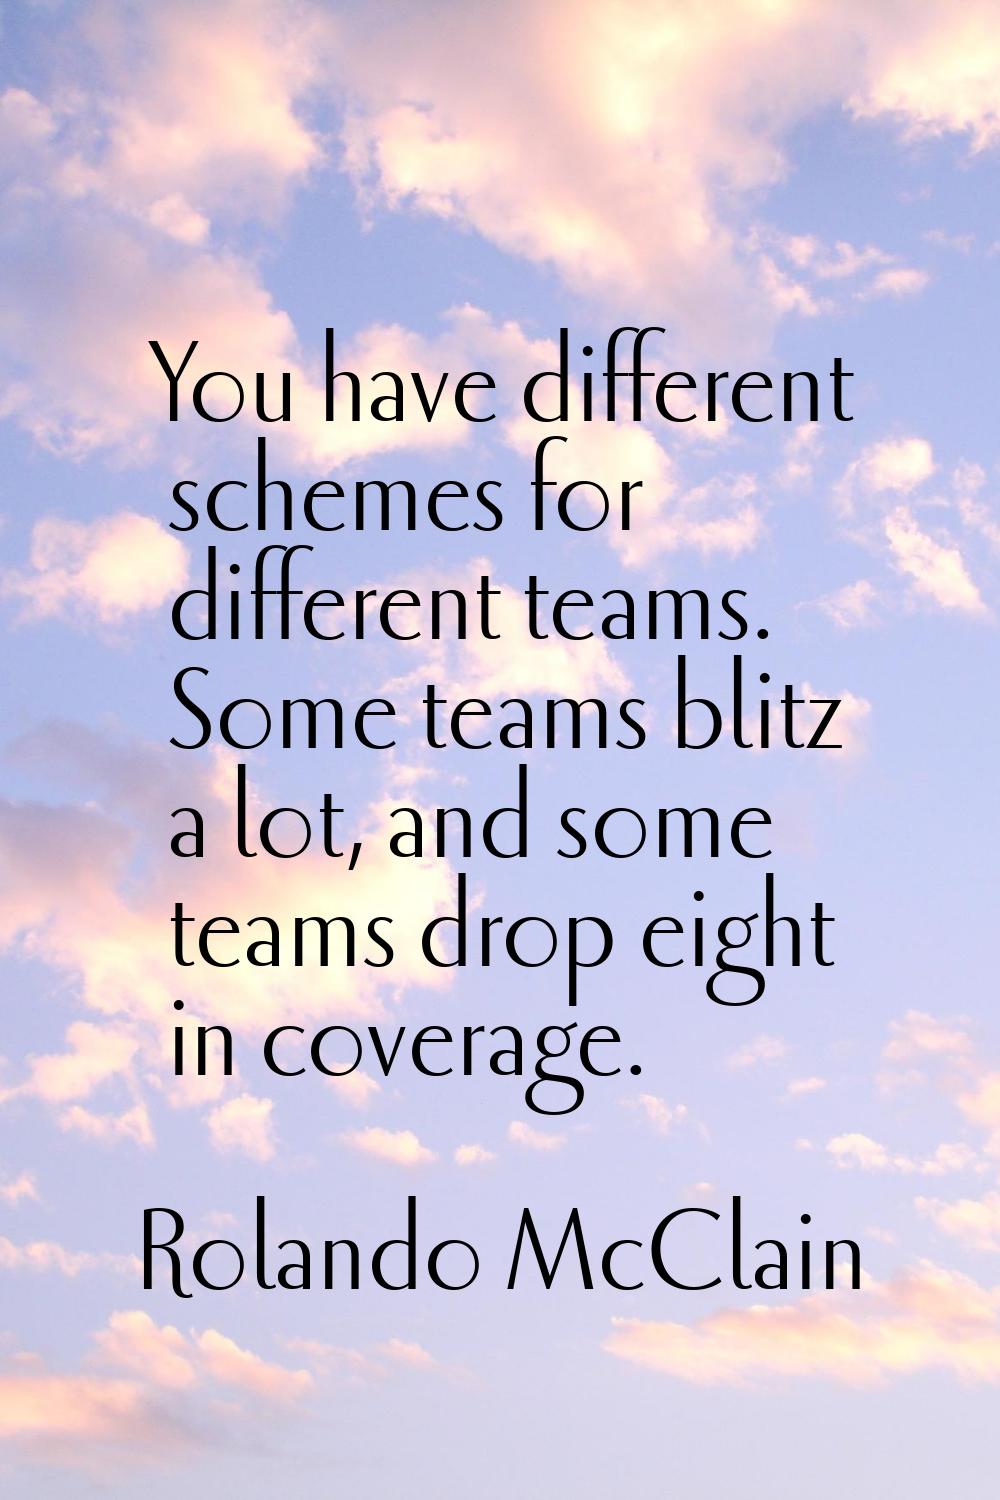 You have different schemes for different teams. Some teams blitz a lot, and some teams drop eight i